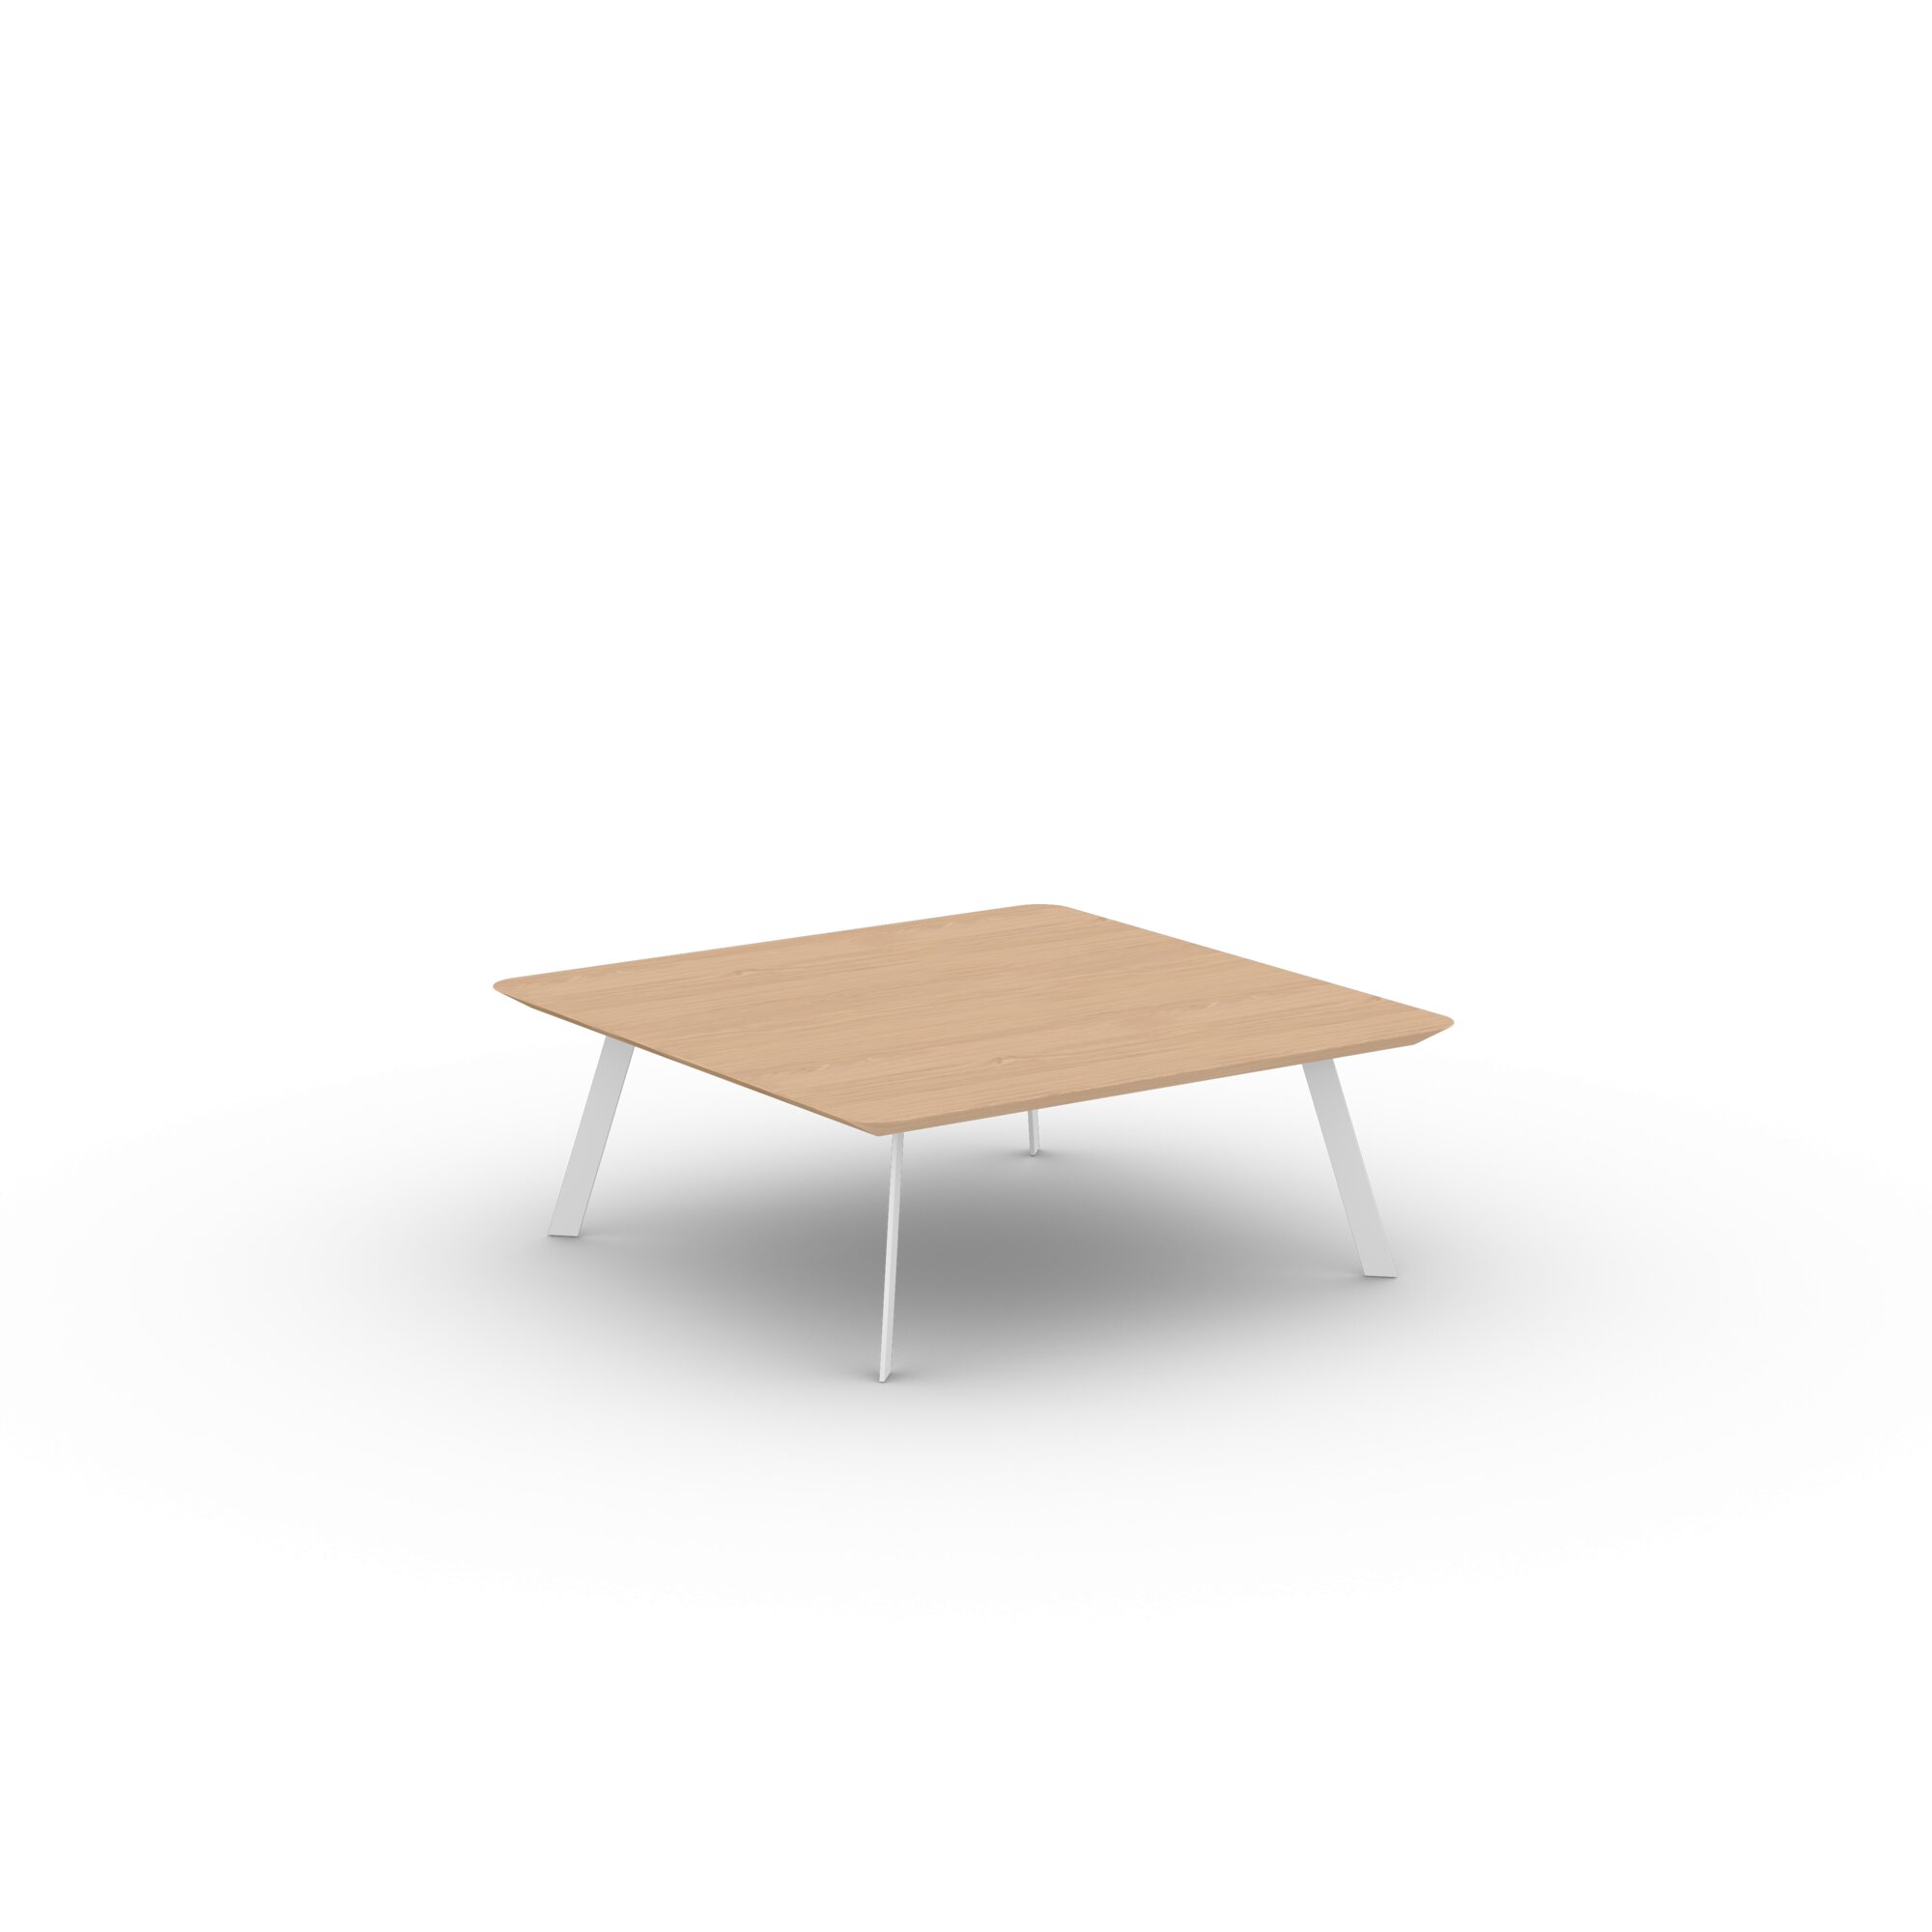 Design Coffee Table | New Co Coffee Table 90 Square White | Oak hardwax oil natural light 3041 | Studio HENK| 